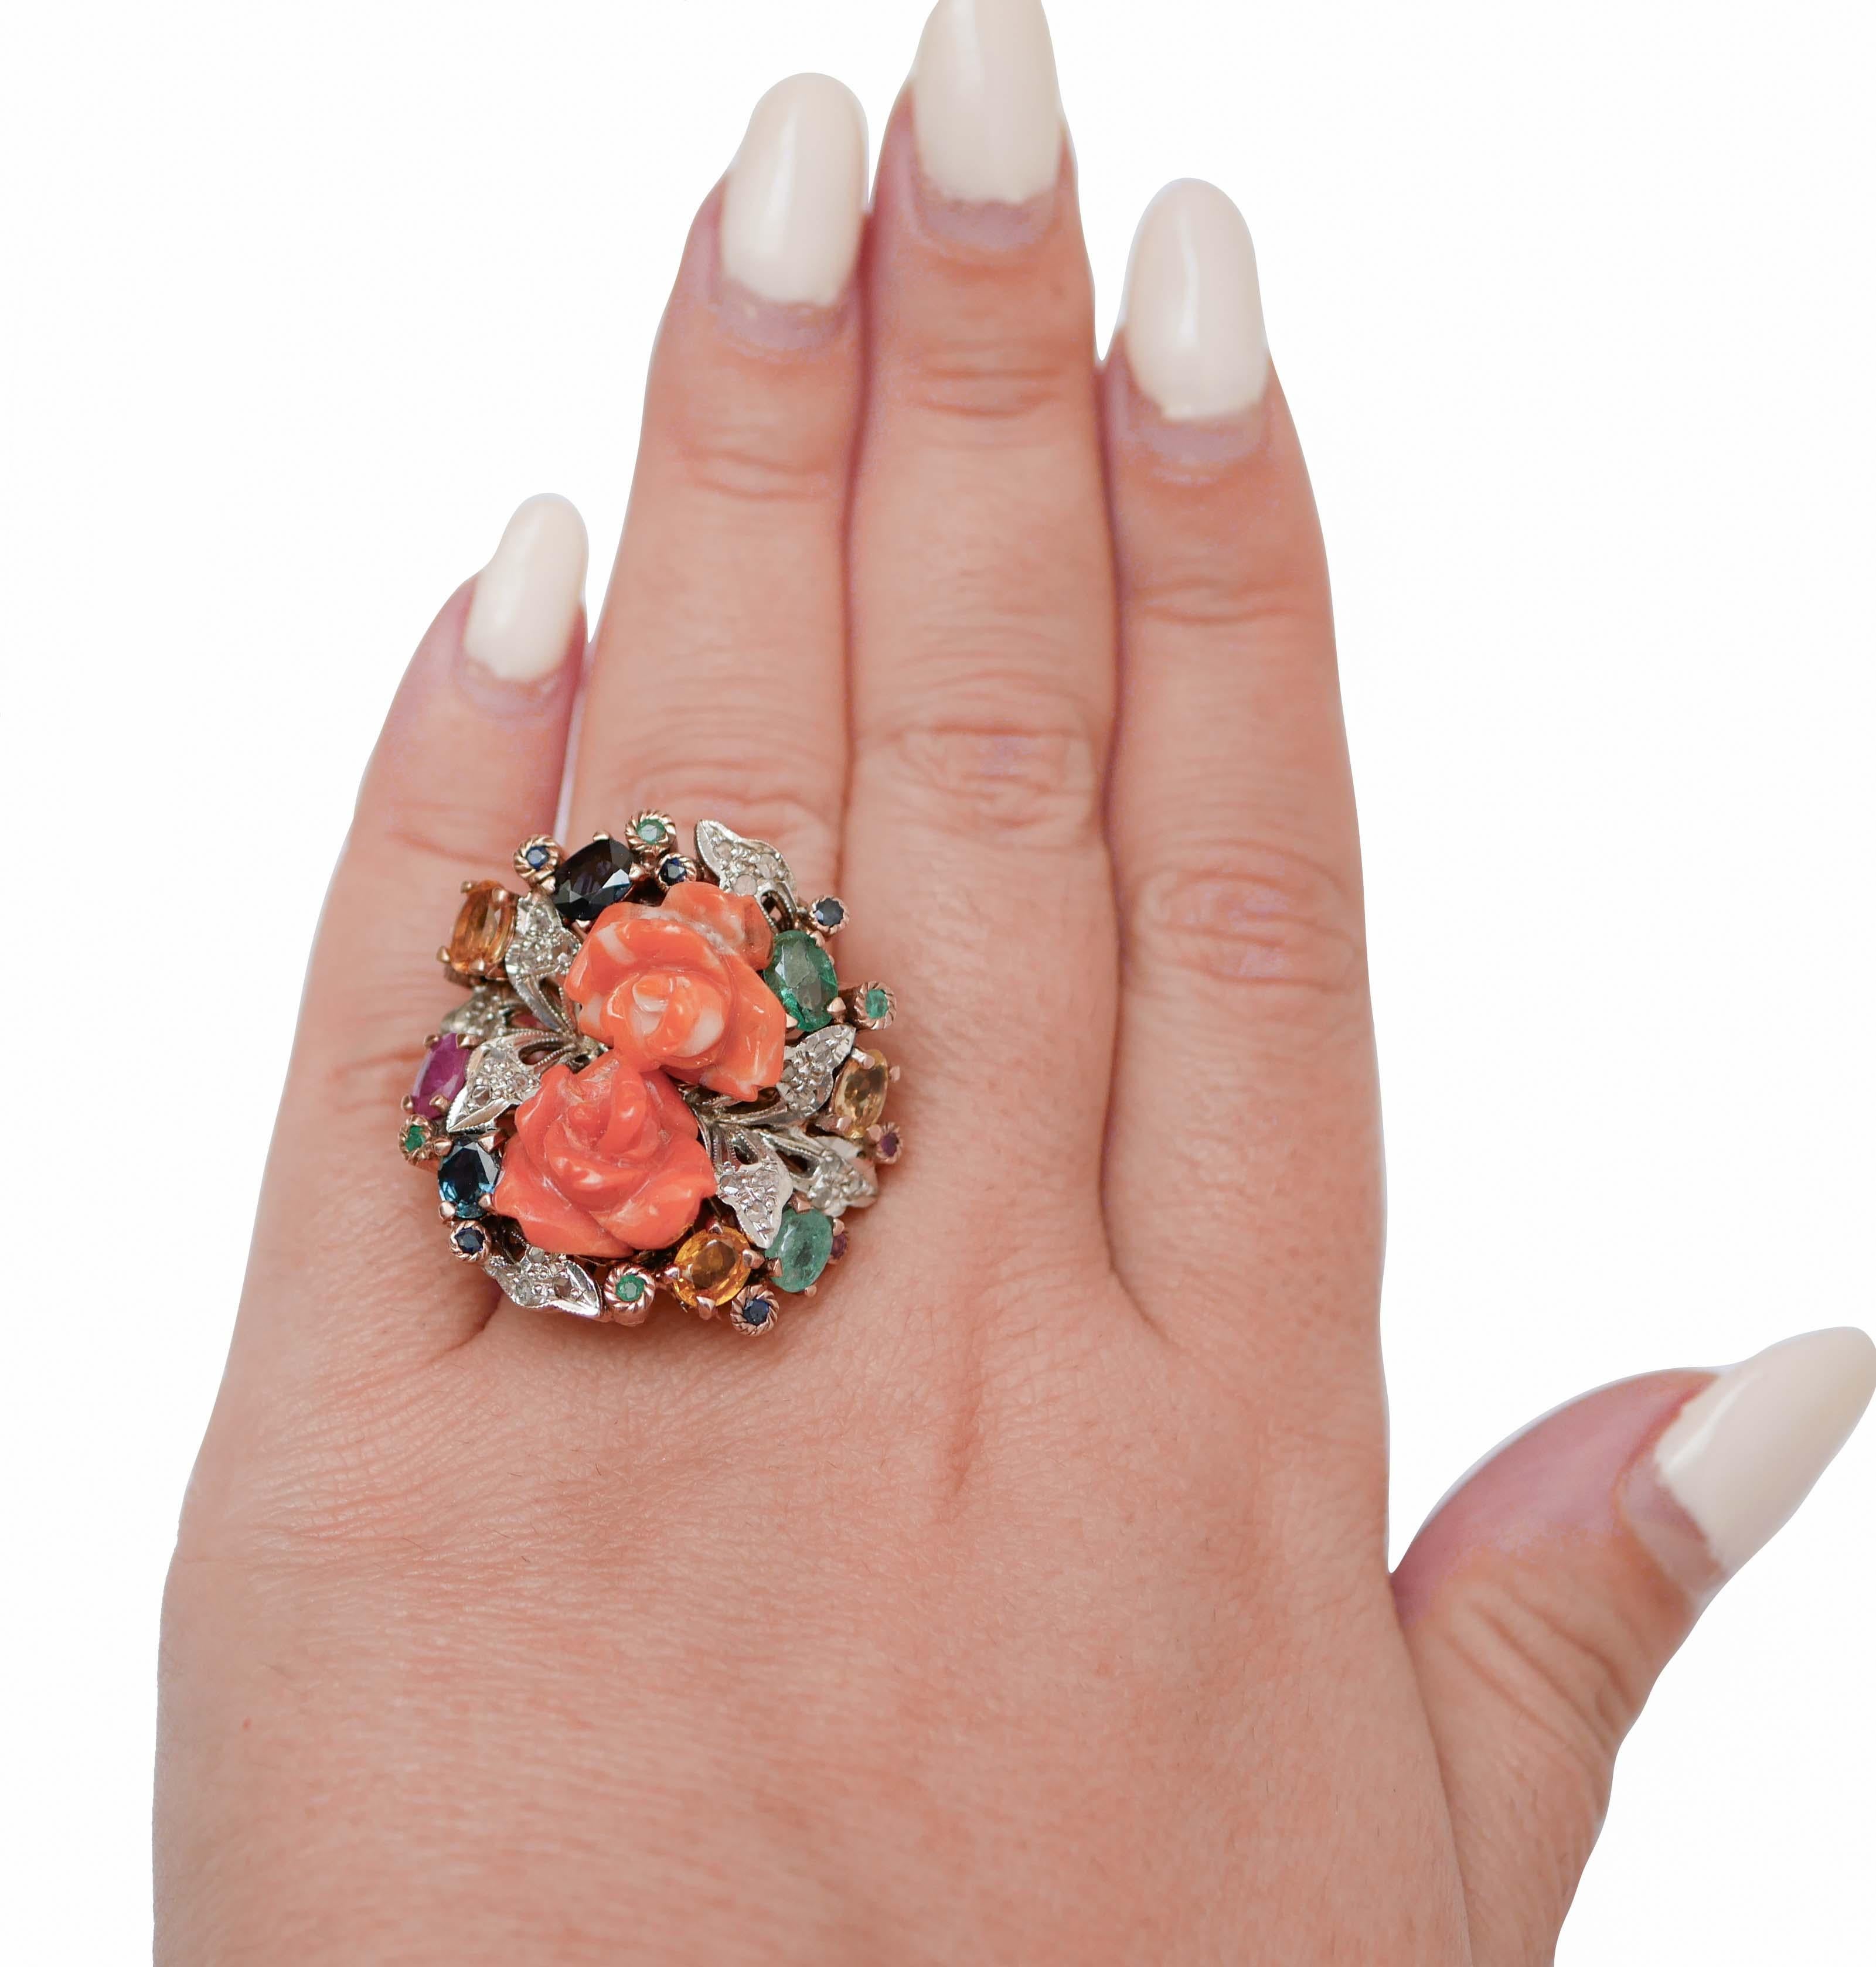 Mixed Cut Coral, Emeralds, Rubies, Sapphires, Diamonds, Rose Gold and Silver Ring. For Sale